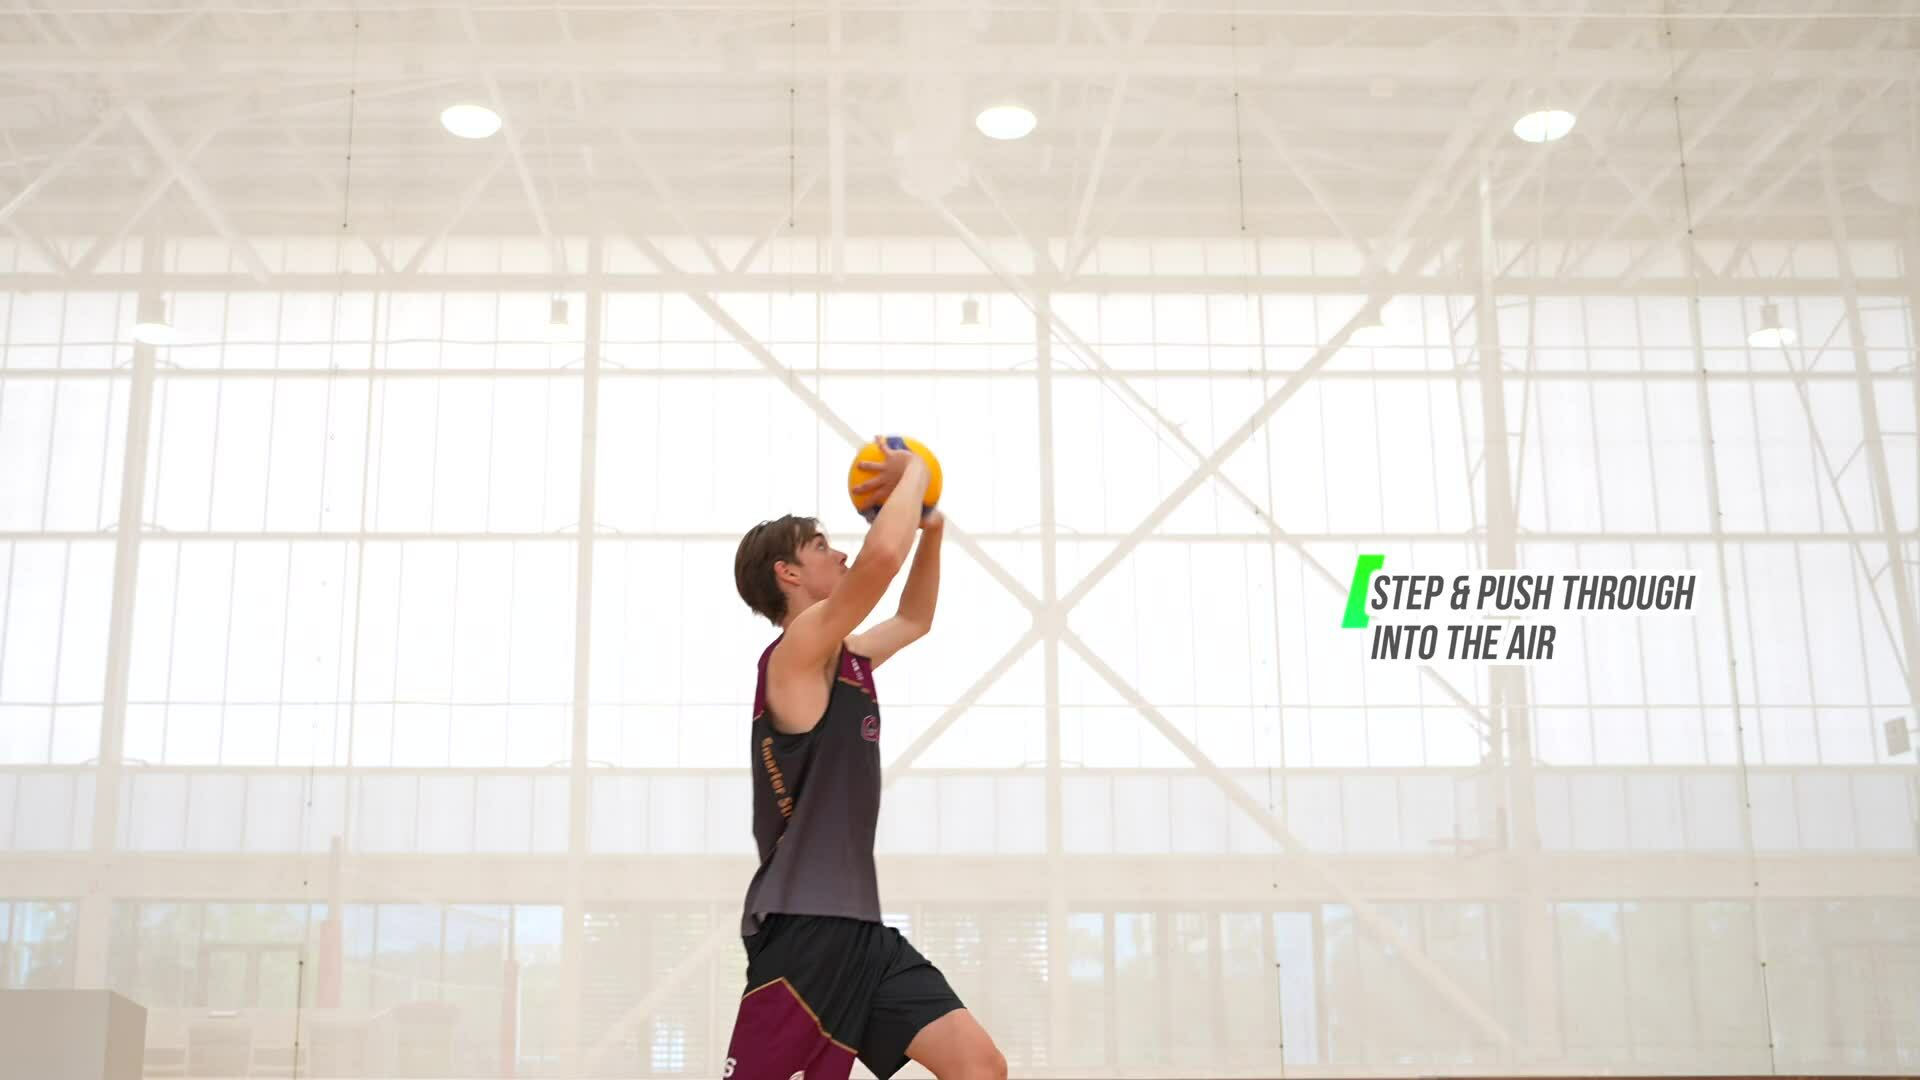 How to play volleyball: Learn the basics of digging, setting, spiking, and serving